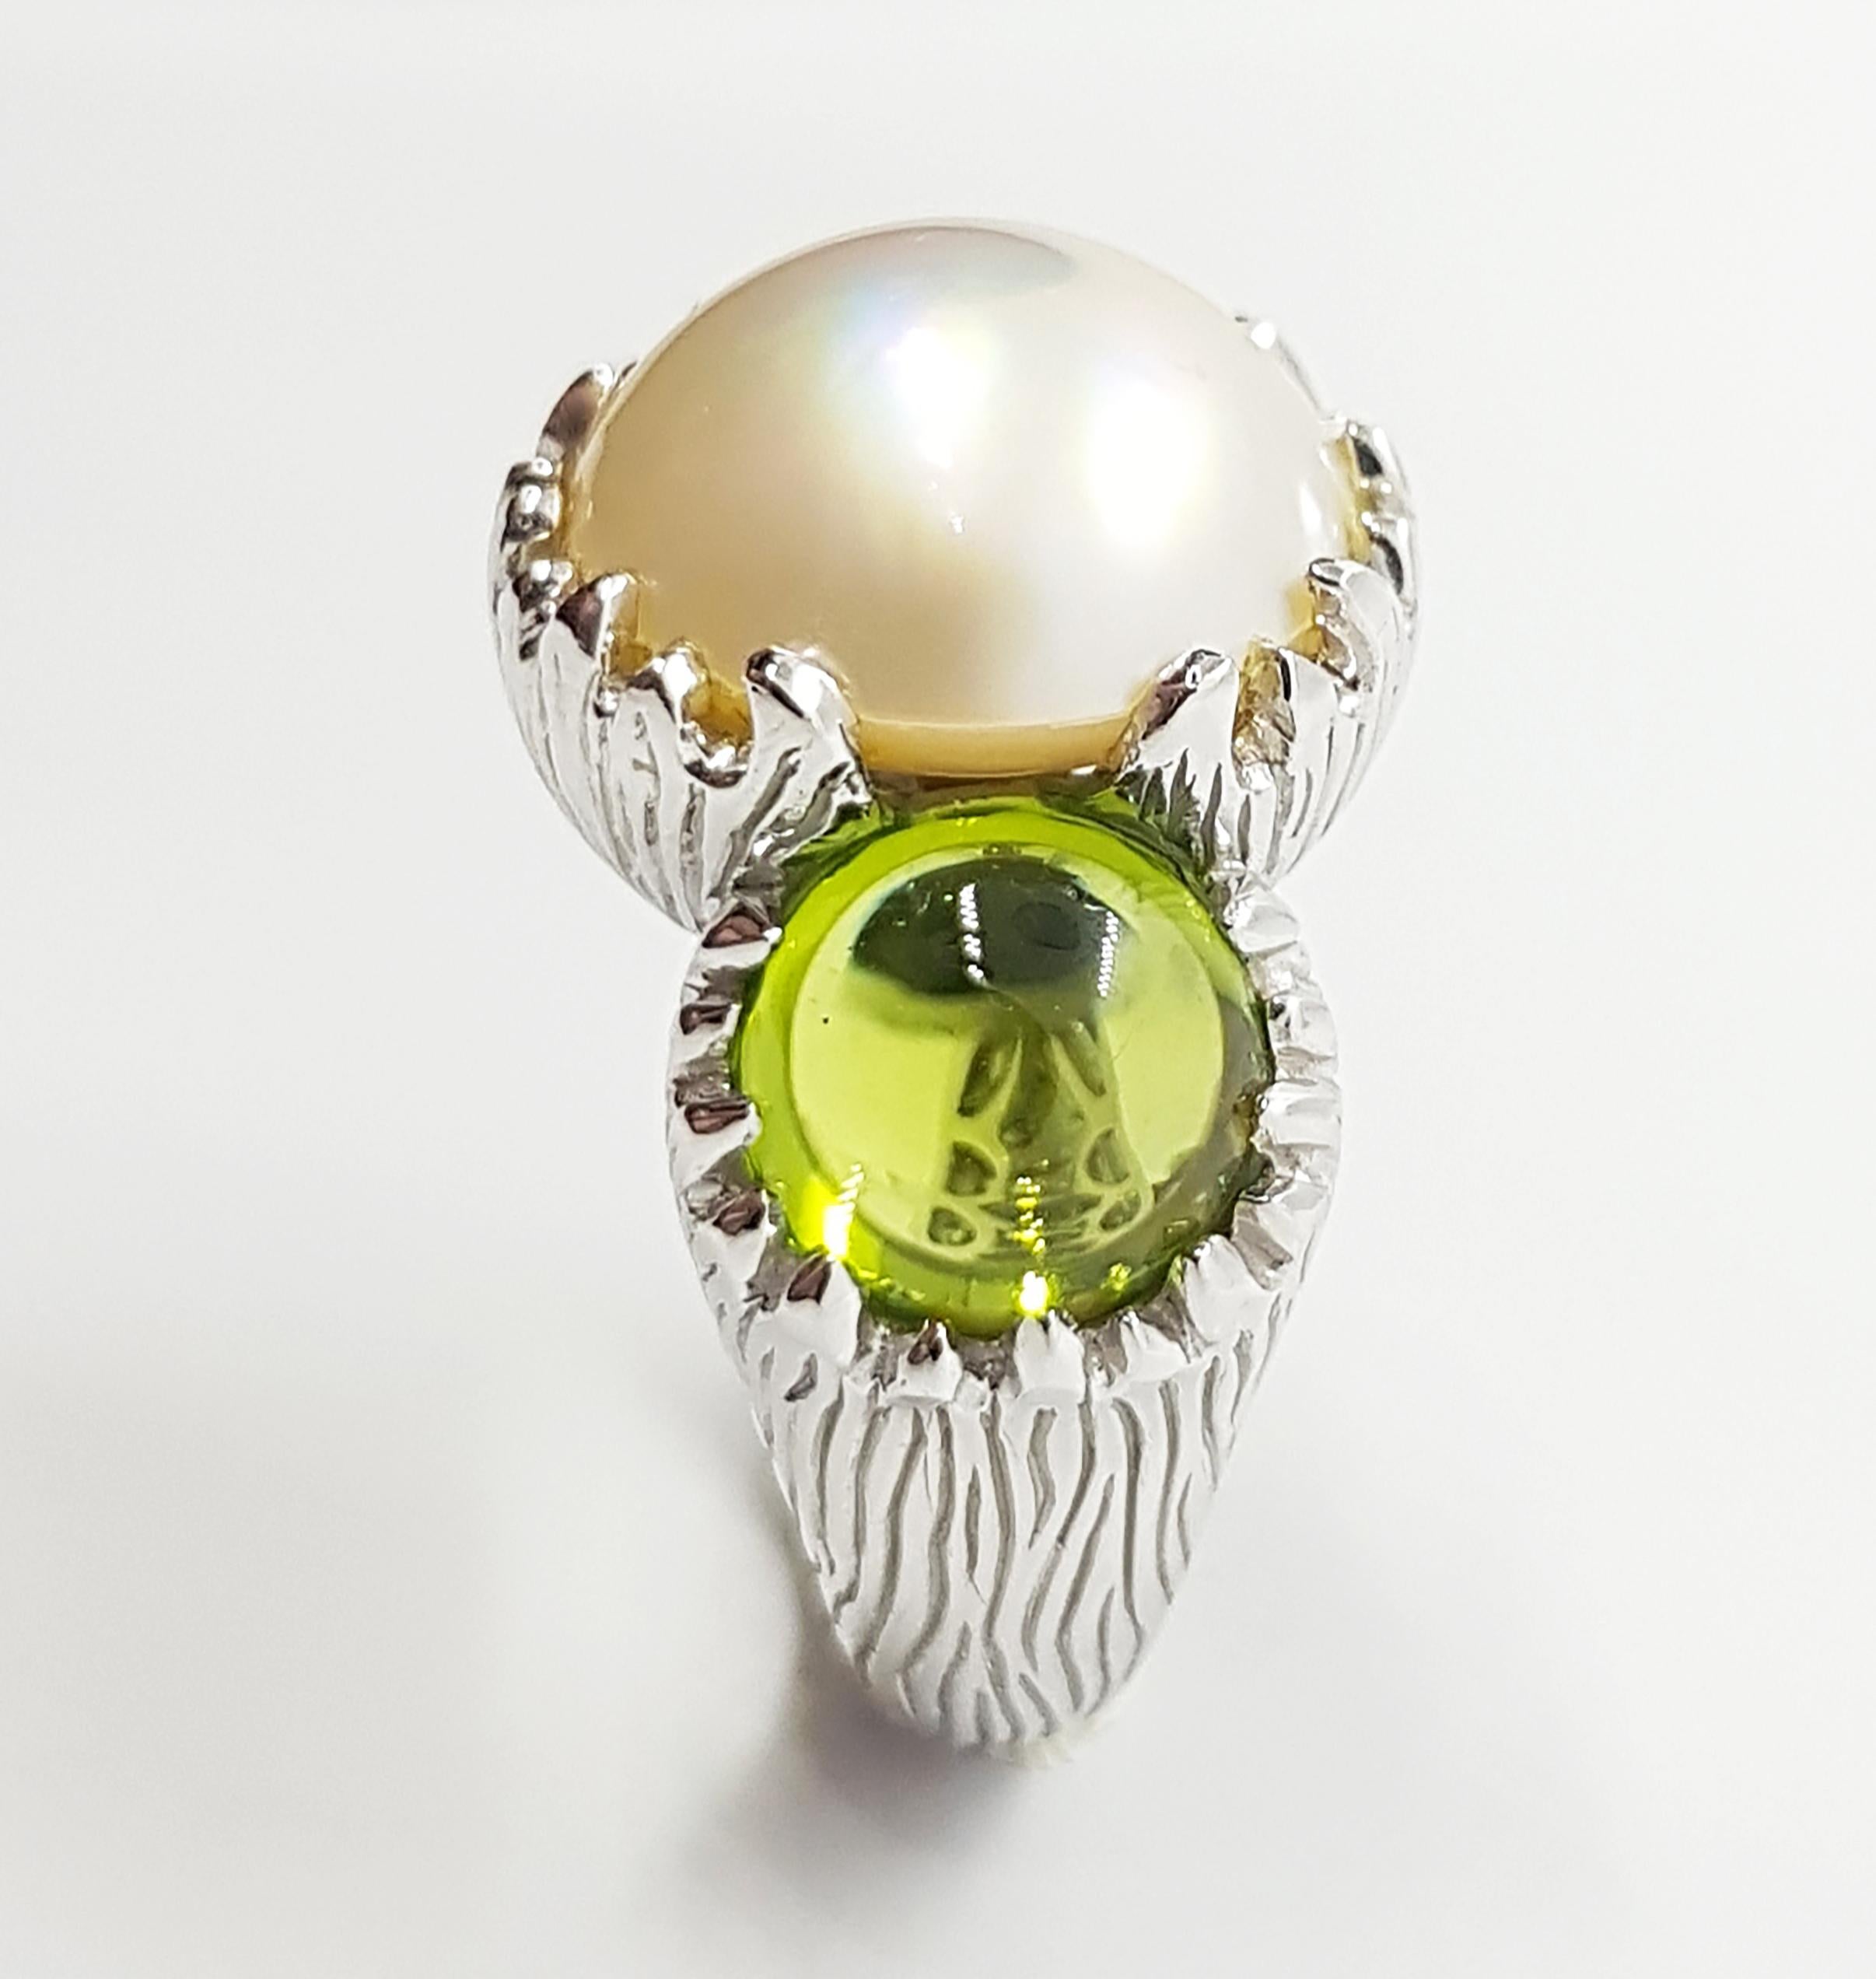 Mabe Pearl with Cabochon Peridot 7.25 carats Ring set in 18 Karat White Gold Settings

Width:  2.4 cm 
Length: 1.5 cm
Ring Size: 52
Total Weight: 18.34 grams

